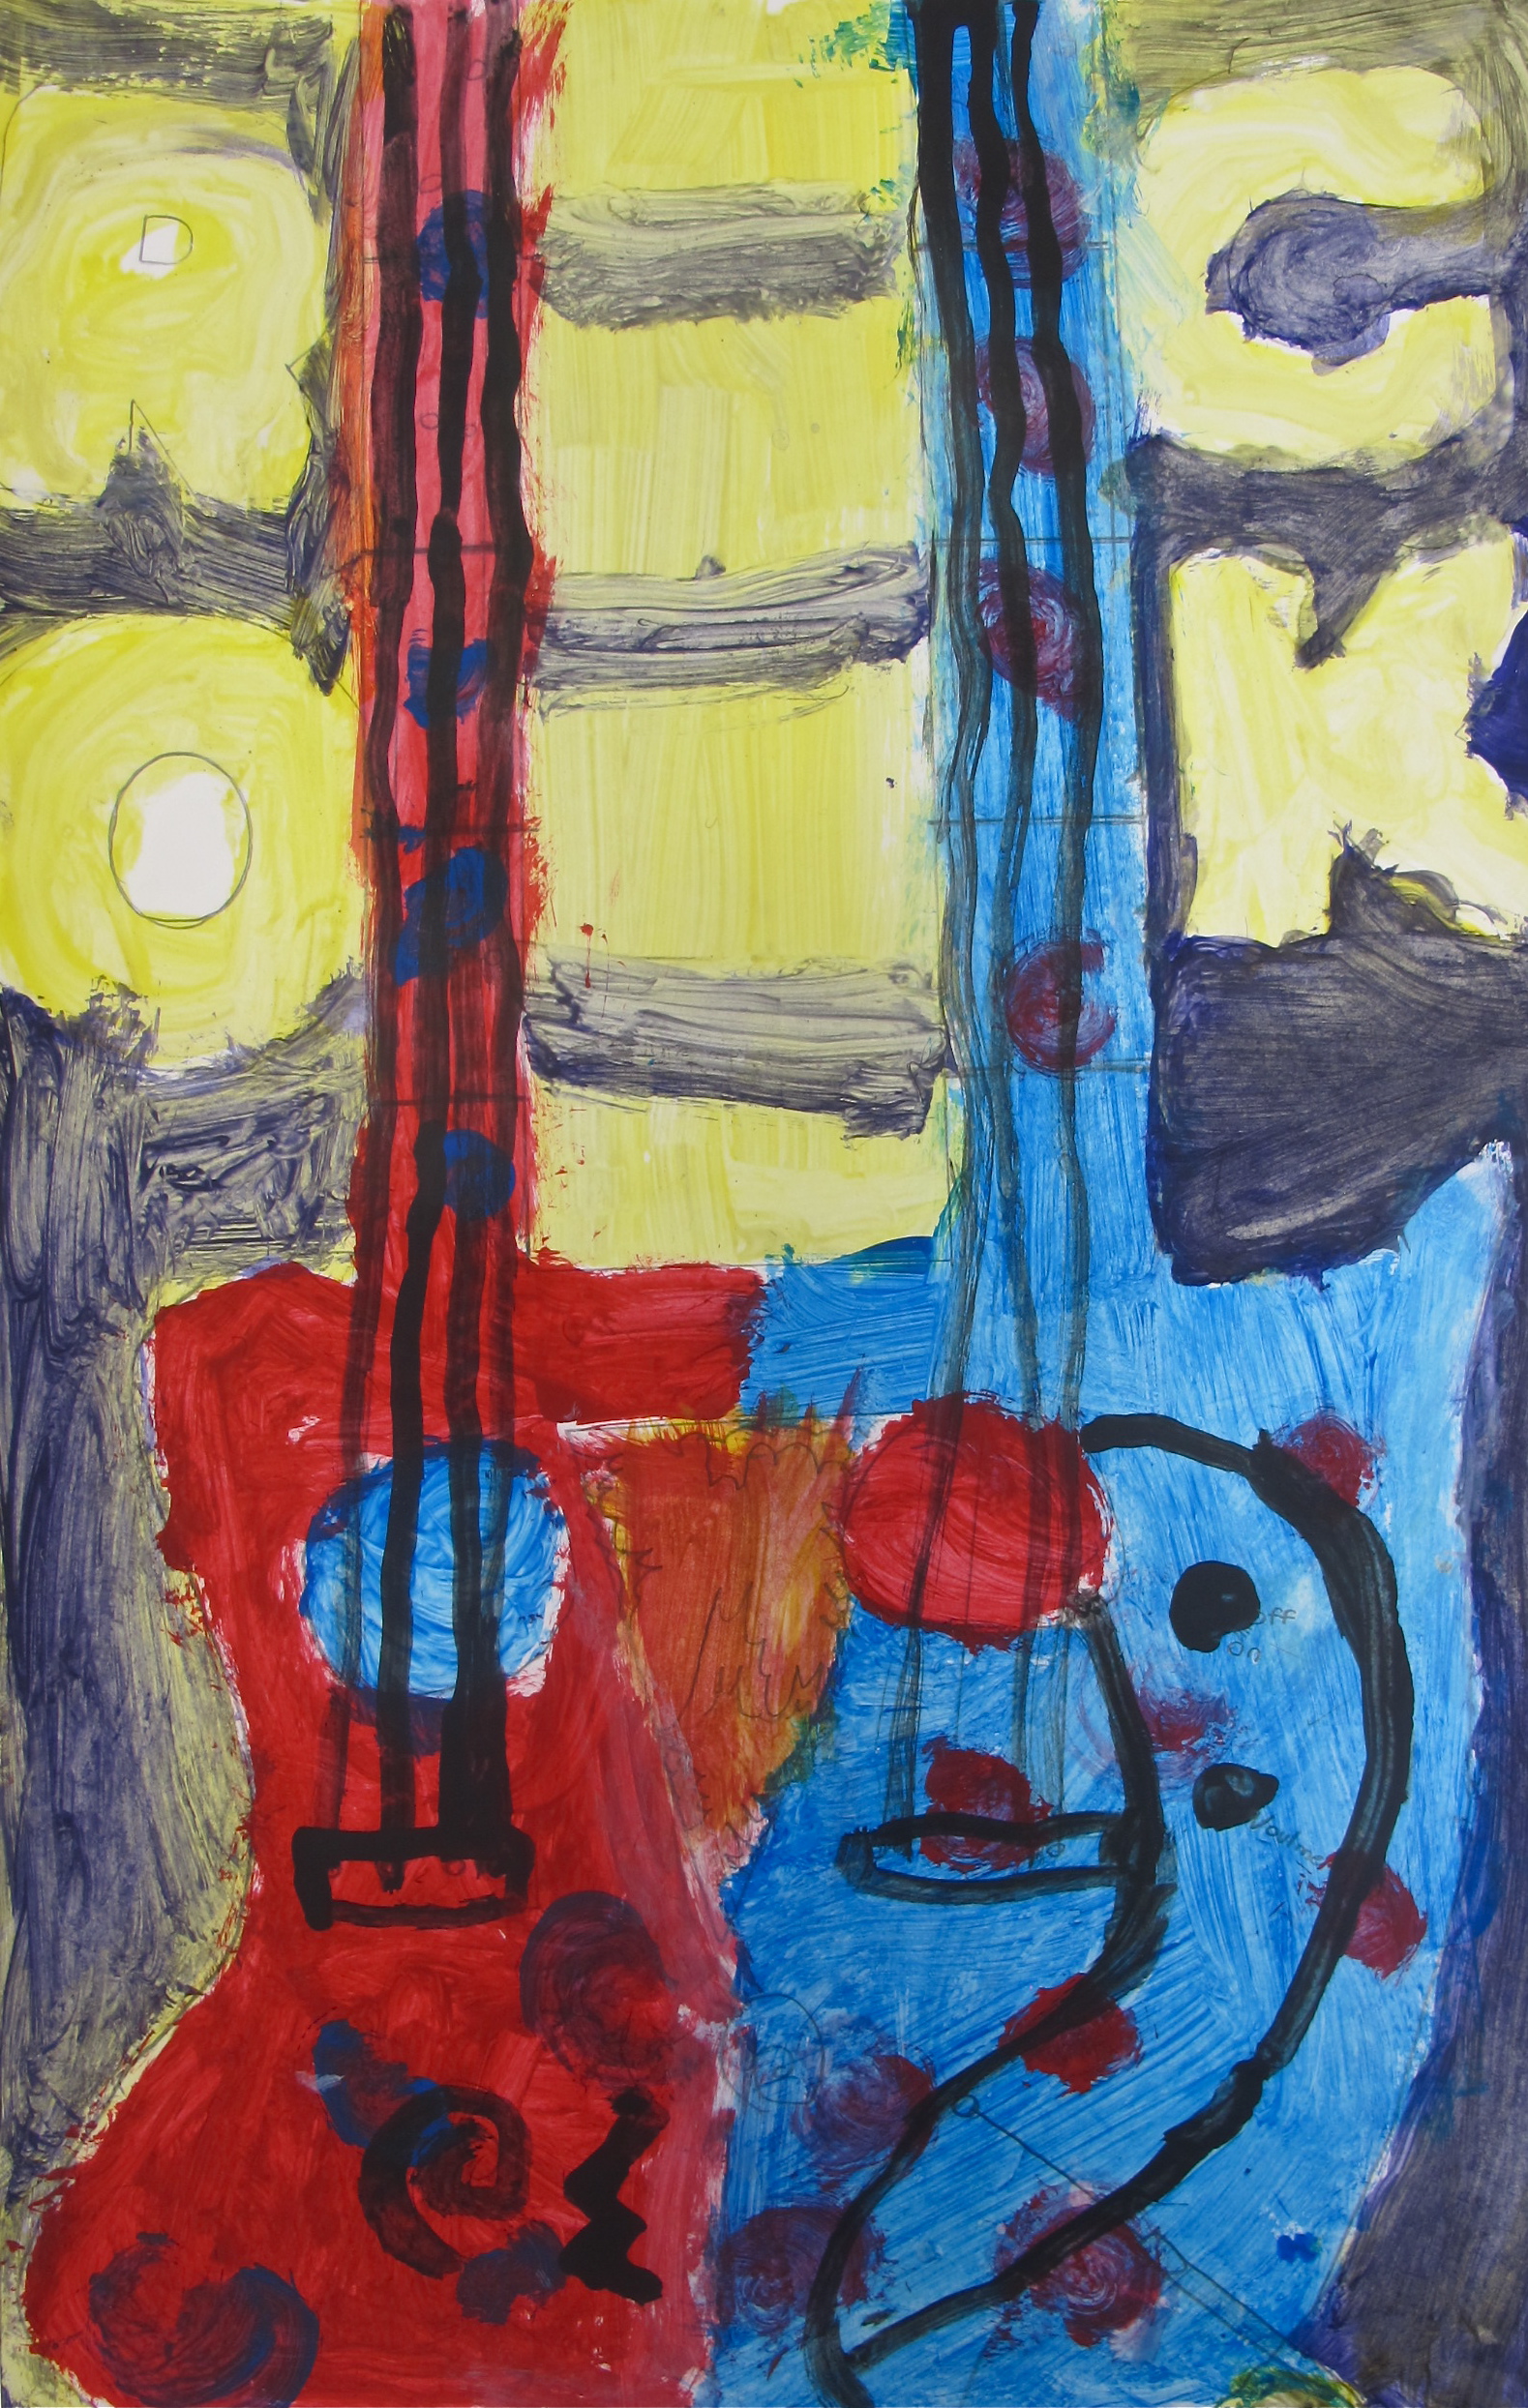 Grade 6/7 Guitar Paintings | Art Here and There